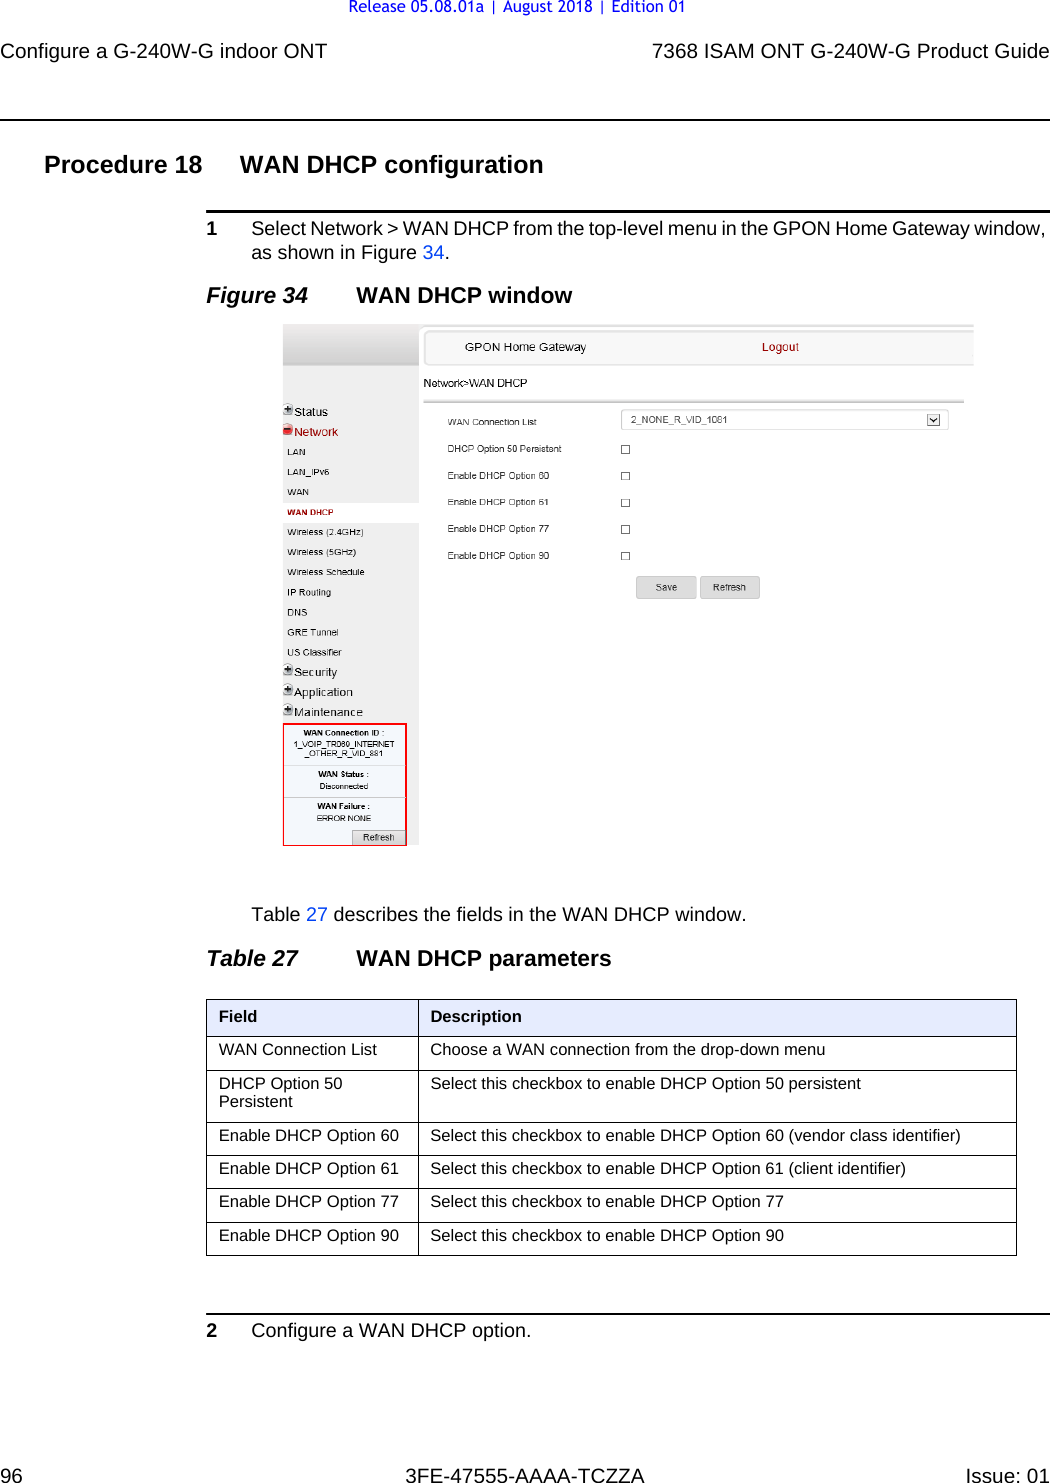 Configure a G-240W-G indoor ONT967368 ISAM ONT G-240W-G Product Guide3FE-47555-AAAA-TCZZA Issue: 01 Procedure 18 WAN DHCP configuration1Select Network &gt; WAN DHCP from the top-level menu in the GPON Home Gateway window, as shown in Figure 34.Figure 34 WAN DHCP windowTable 27 describes the fields in the WAN DHCP window.Table 27 WAN DHCP parameters2Configure a WAN DHCP option.Field DescriptionWAN Connection List Choose a WAN connection from the drop-down menuDHCP Option 50 Persistent Select this checkbox to enable DHCP Option 50 persistentEnable DHCP Option 60 Select this checkbox to enable DHCP Option 60 (vendor class identifier)Enable DHCP Option 61 Select this checkbox to enable DHCP Option 61 (client identifier)Enable DHCP Option 77 Select this checkbox to enable DHCP Option 77Enable DHCP Option 90 Select this checkbox to enable DHCP Option 90Release 05.08.01a | August 2018 | Edition 01